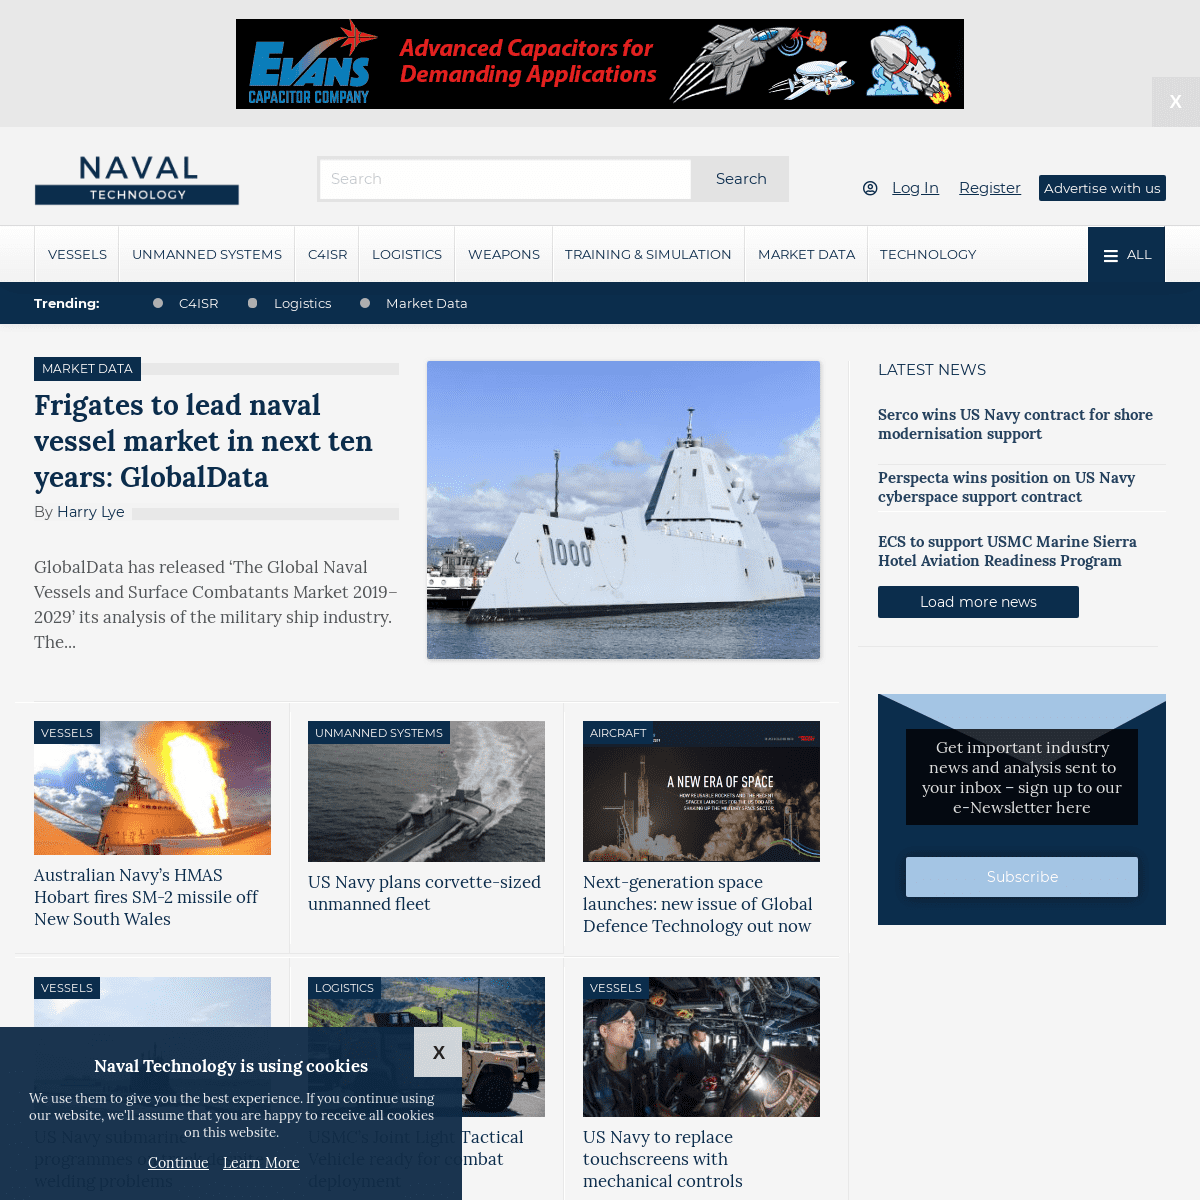 Naval Technology | Naval Defence News & Views Updated Daily